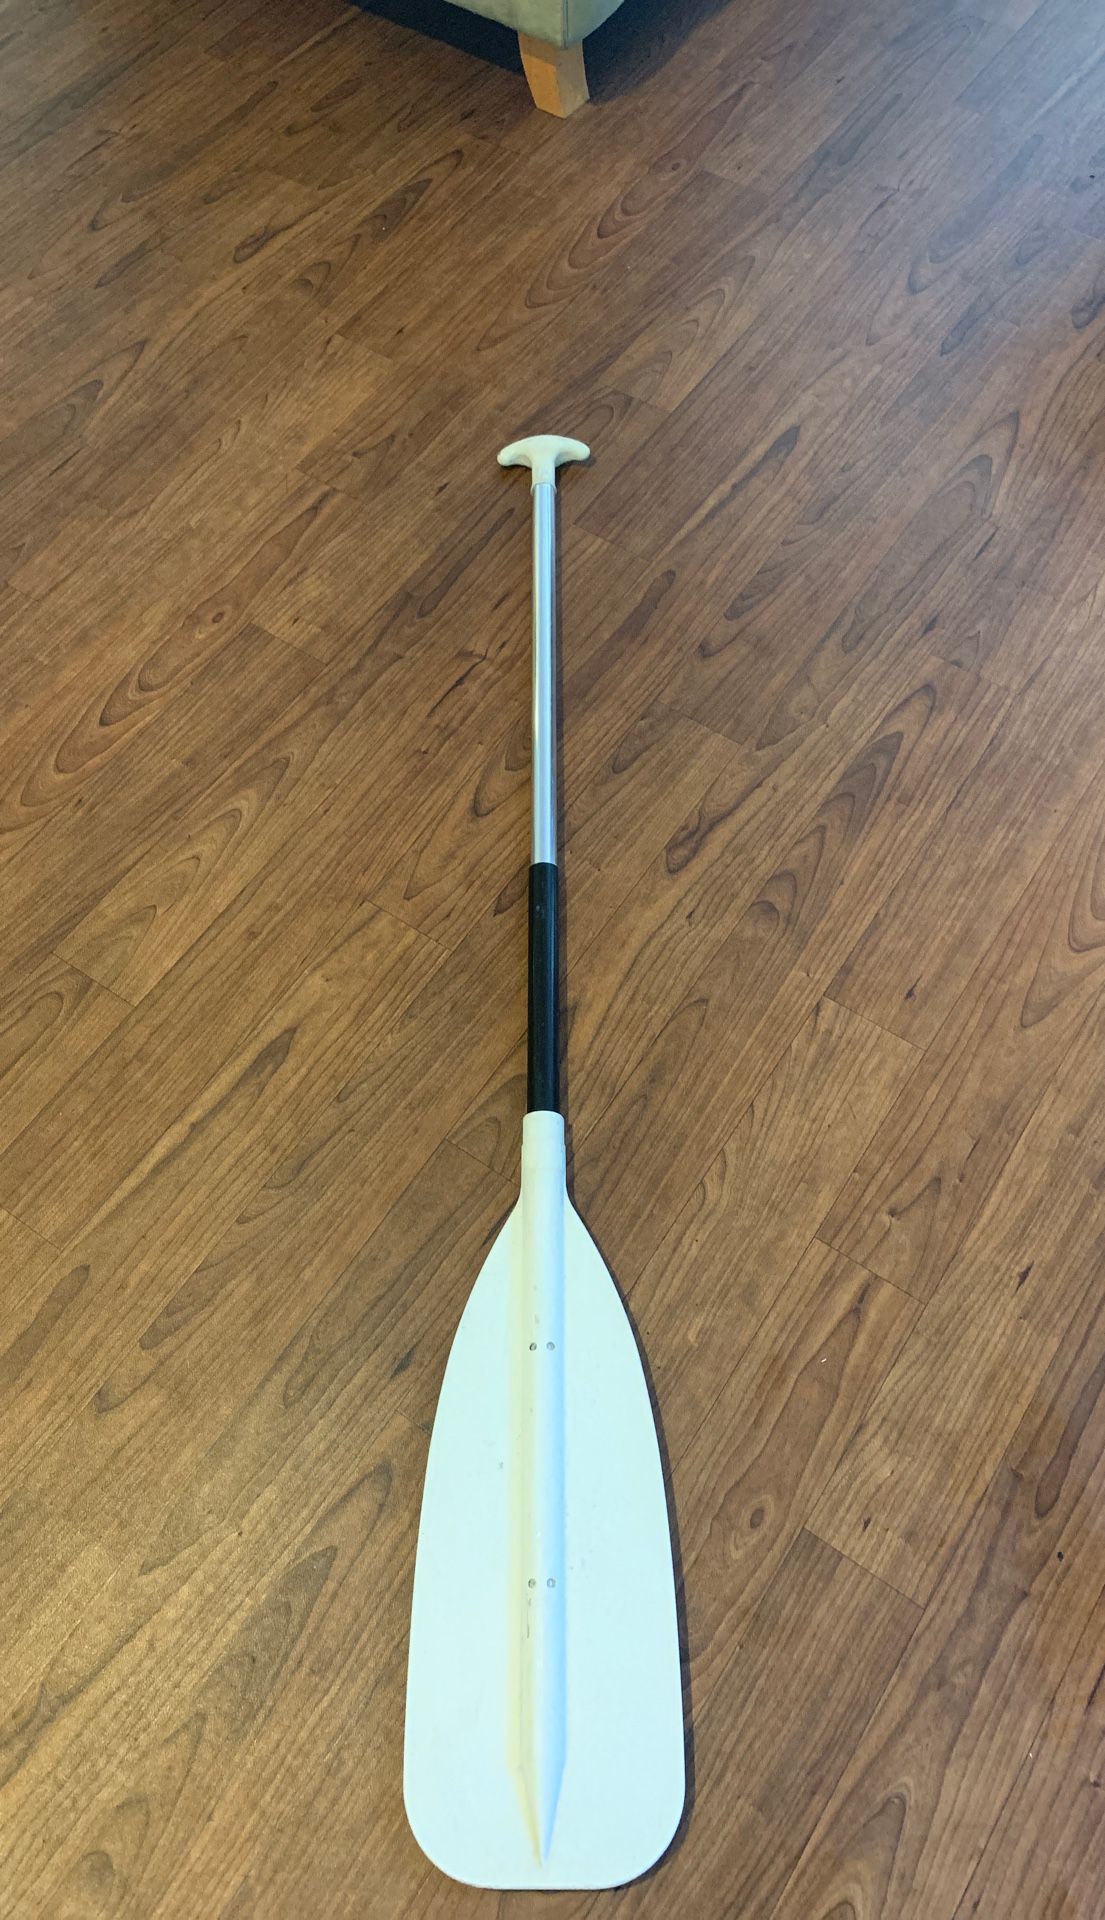 Heavy Duty boat paddle. Good condition! Good price!